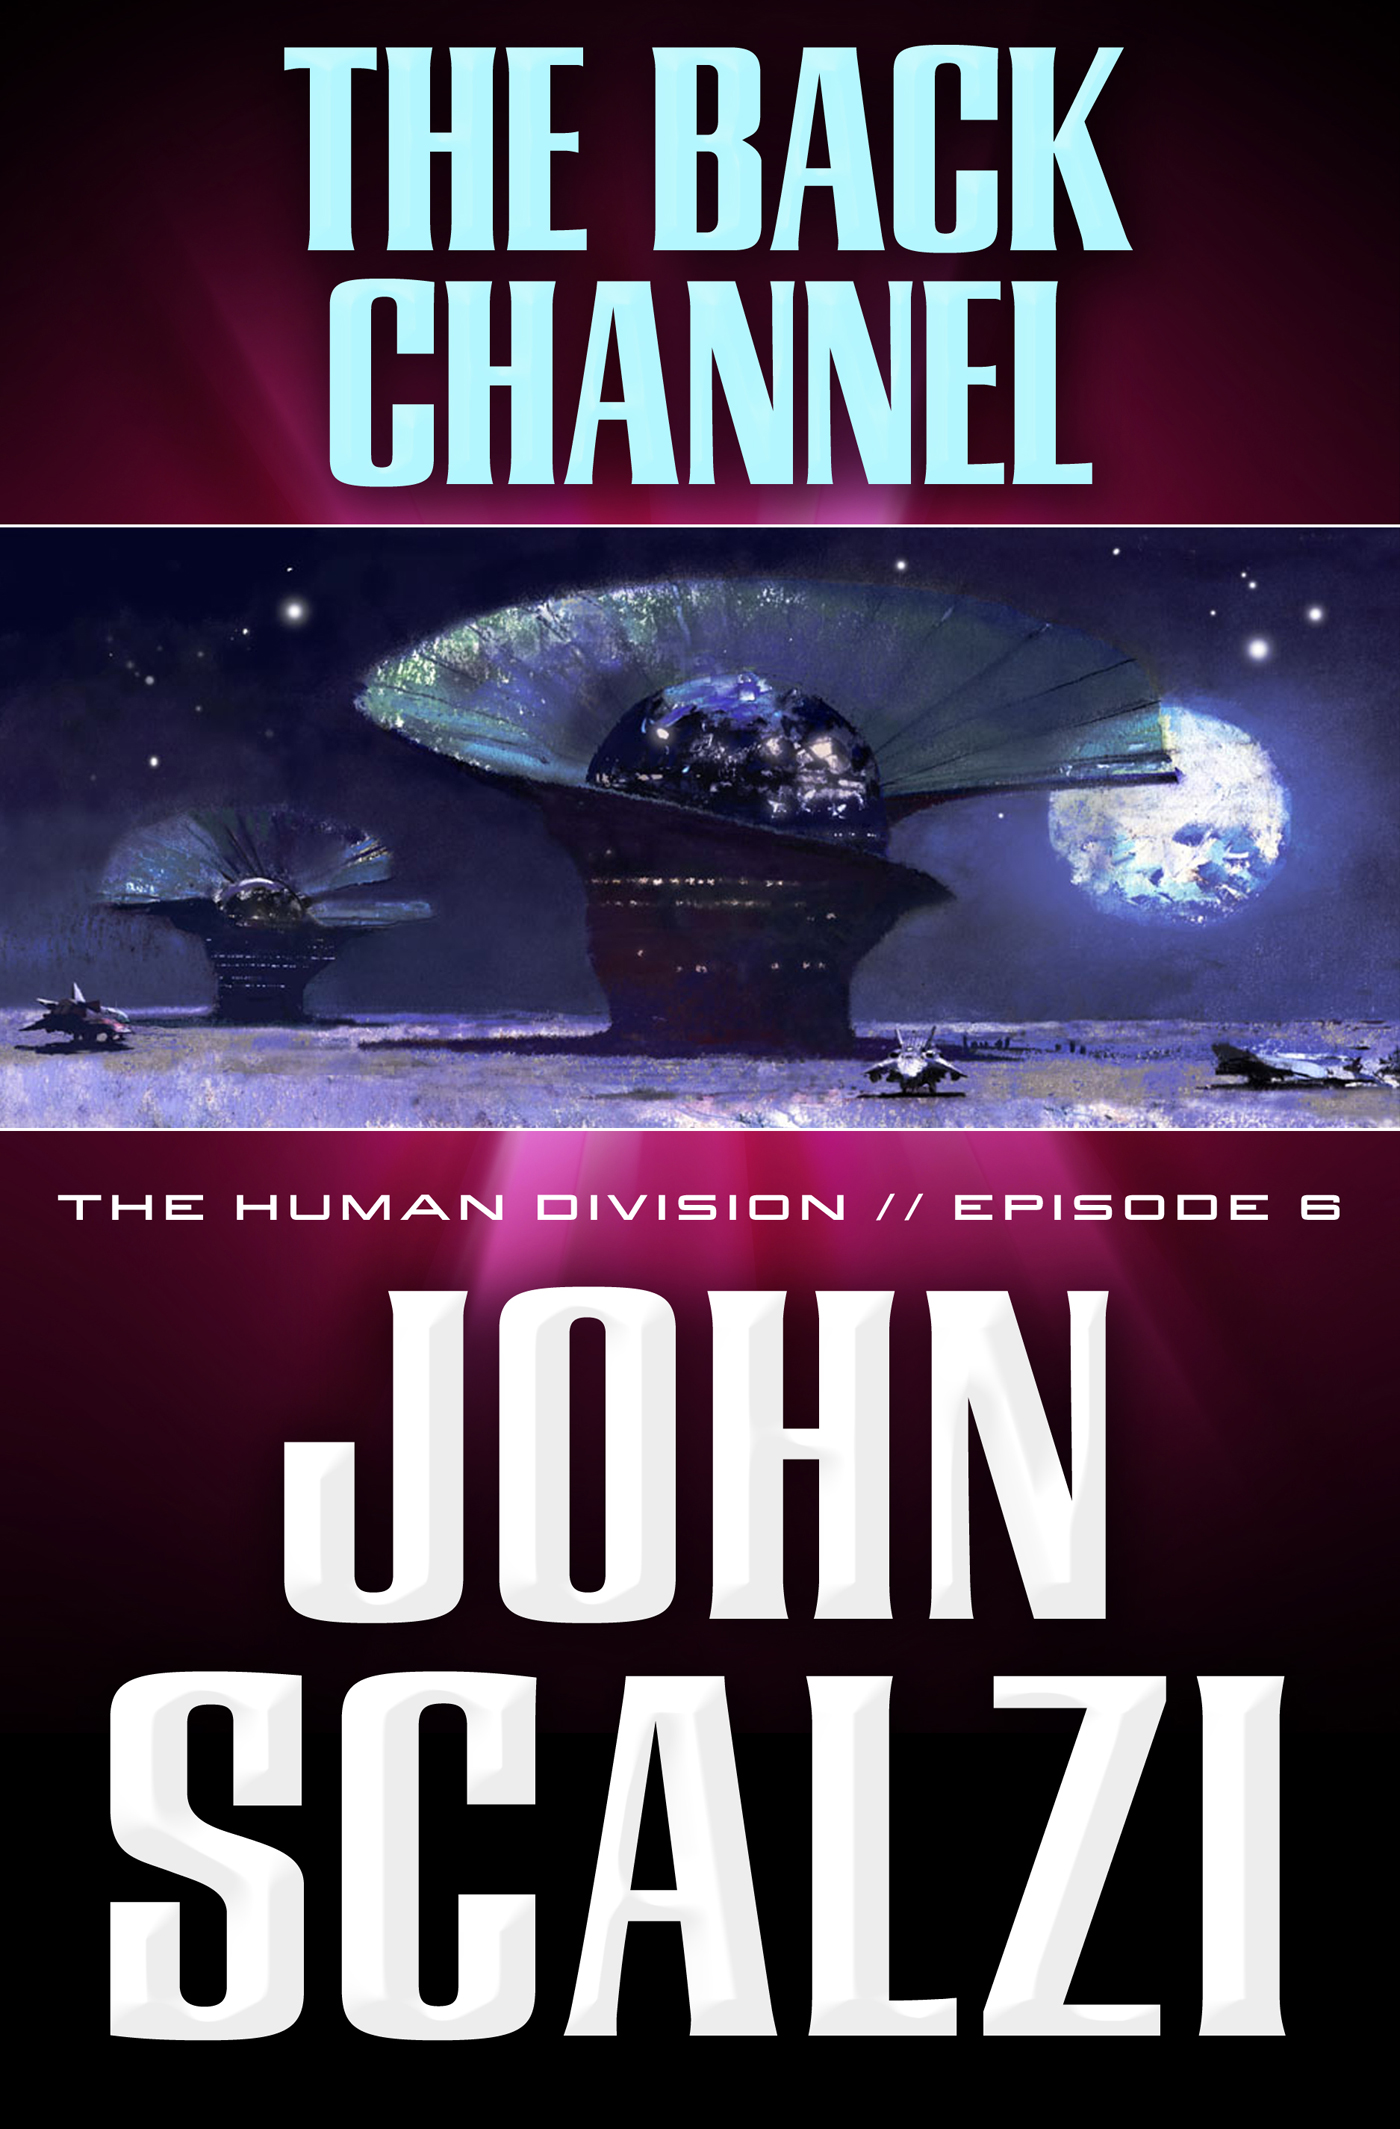 The Human Division #6: The Back Channel by John Scalzi